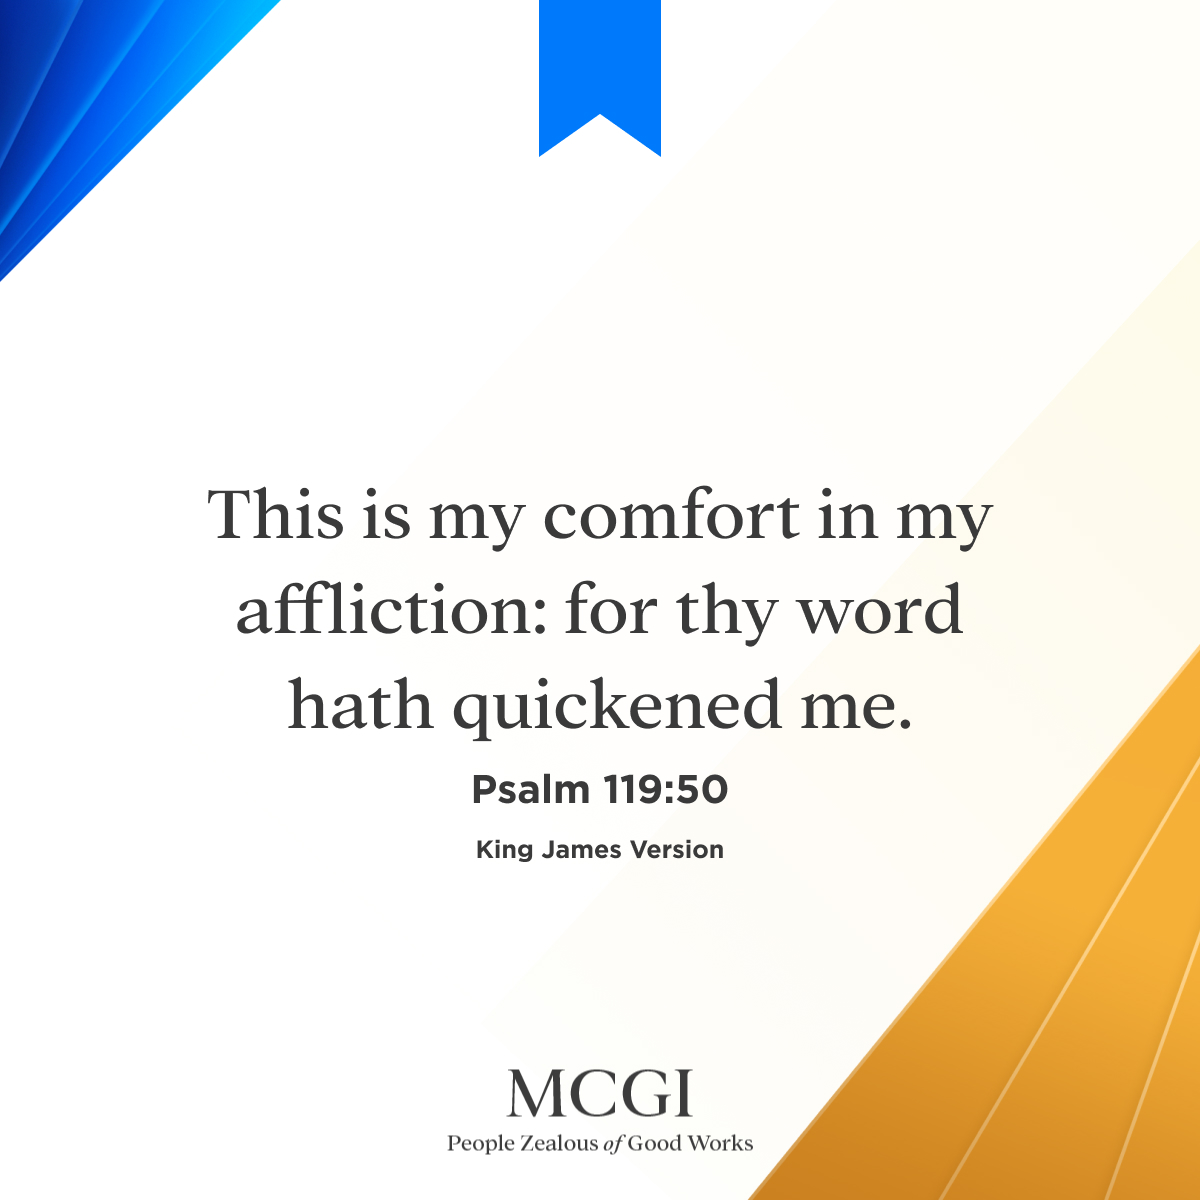 This is my comfort in my affliction: for thy word hath quickened me.

(Psalm 119:50, KJV)

#BlessedAndThankful
#MCGICares